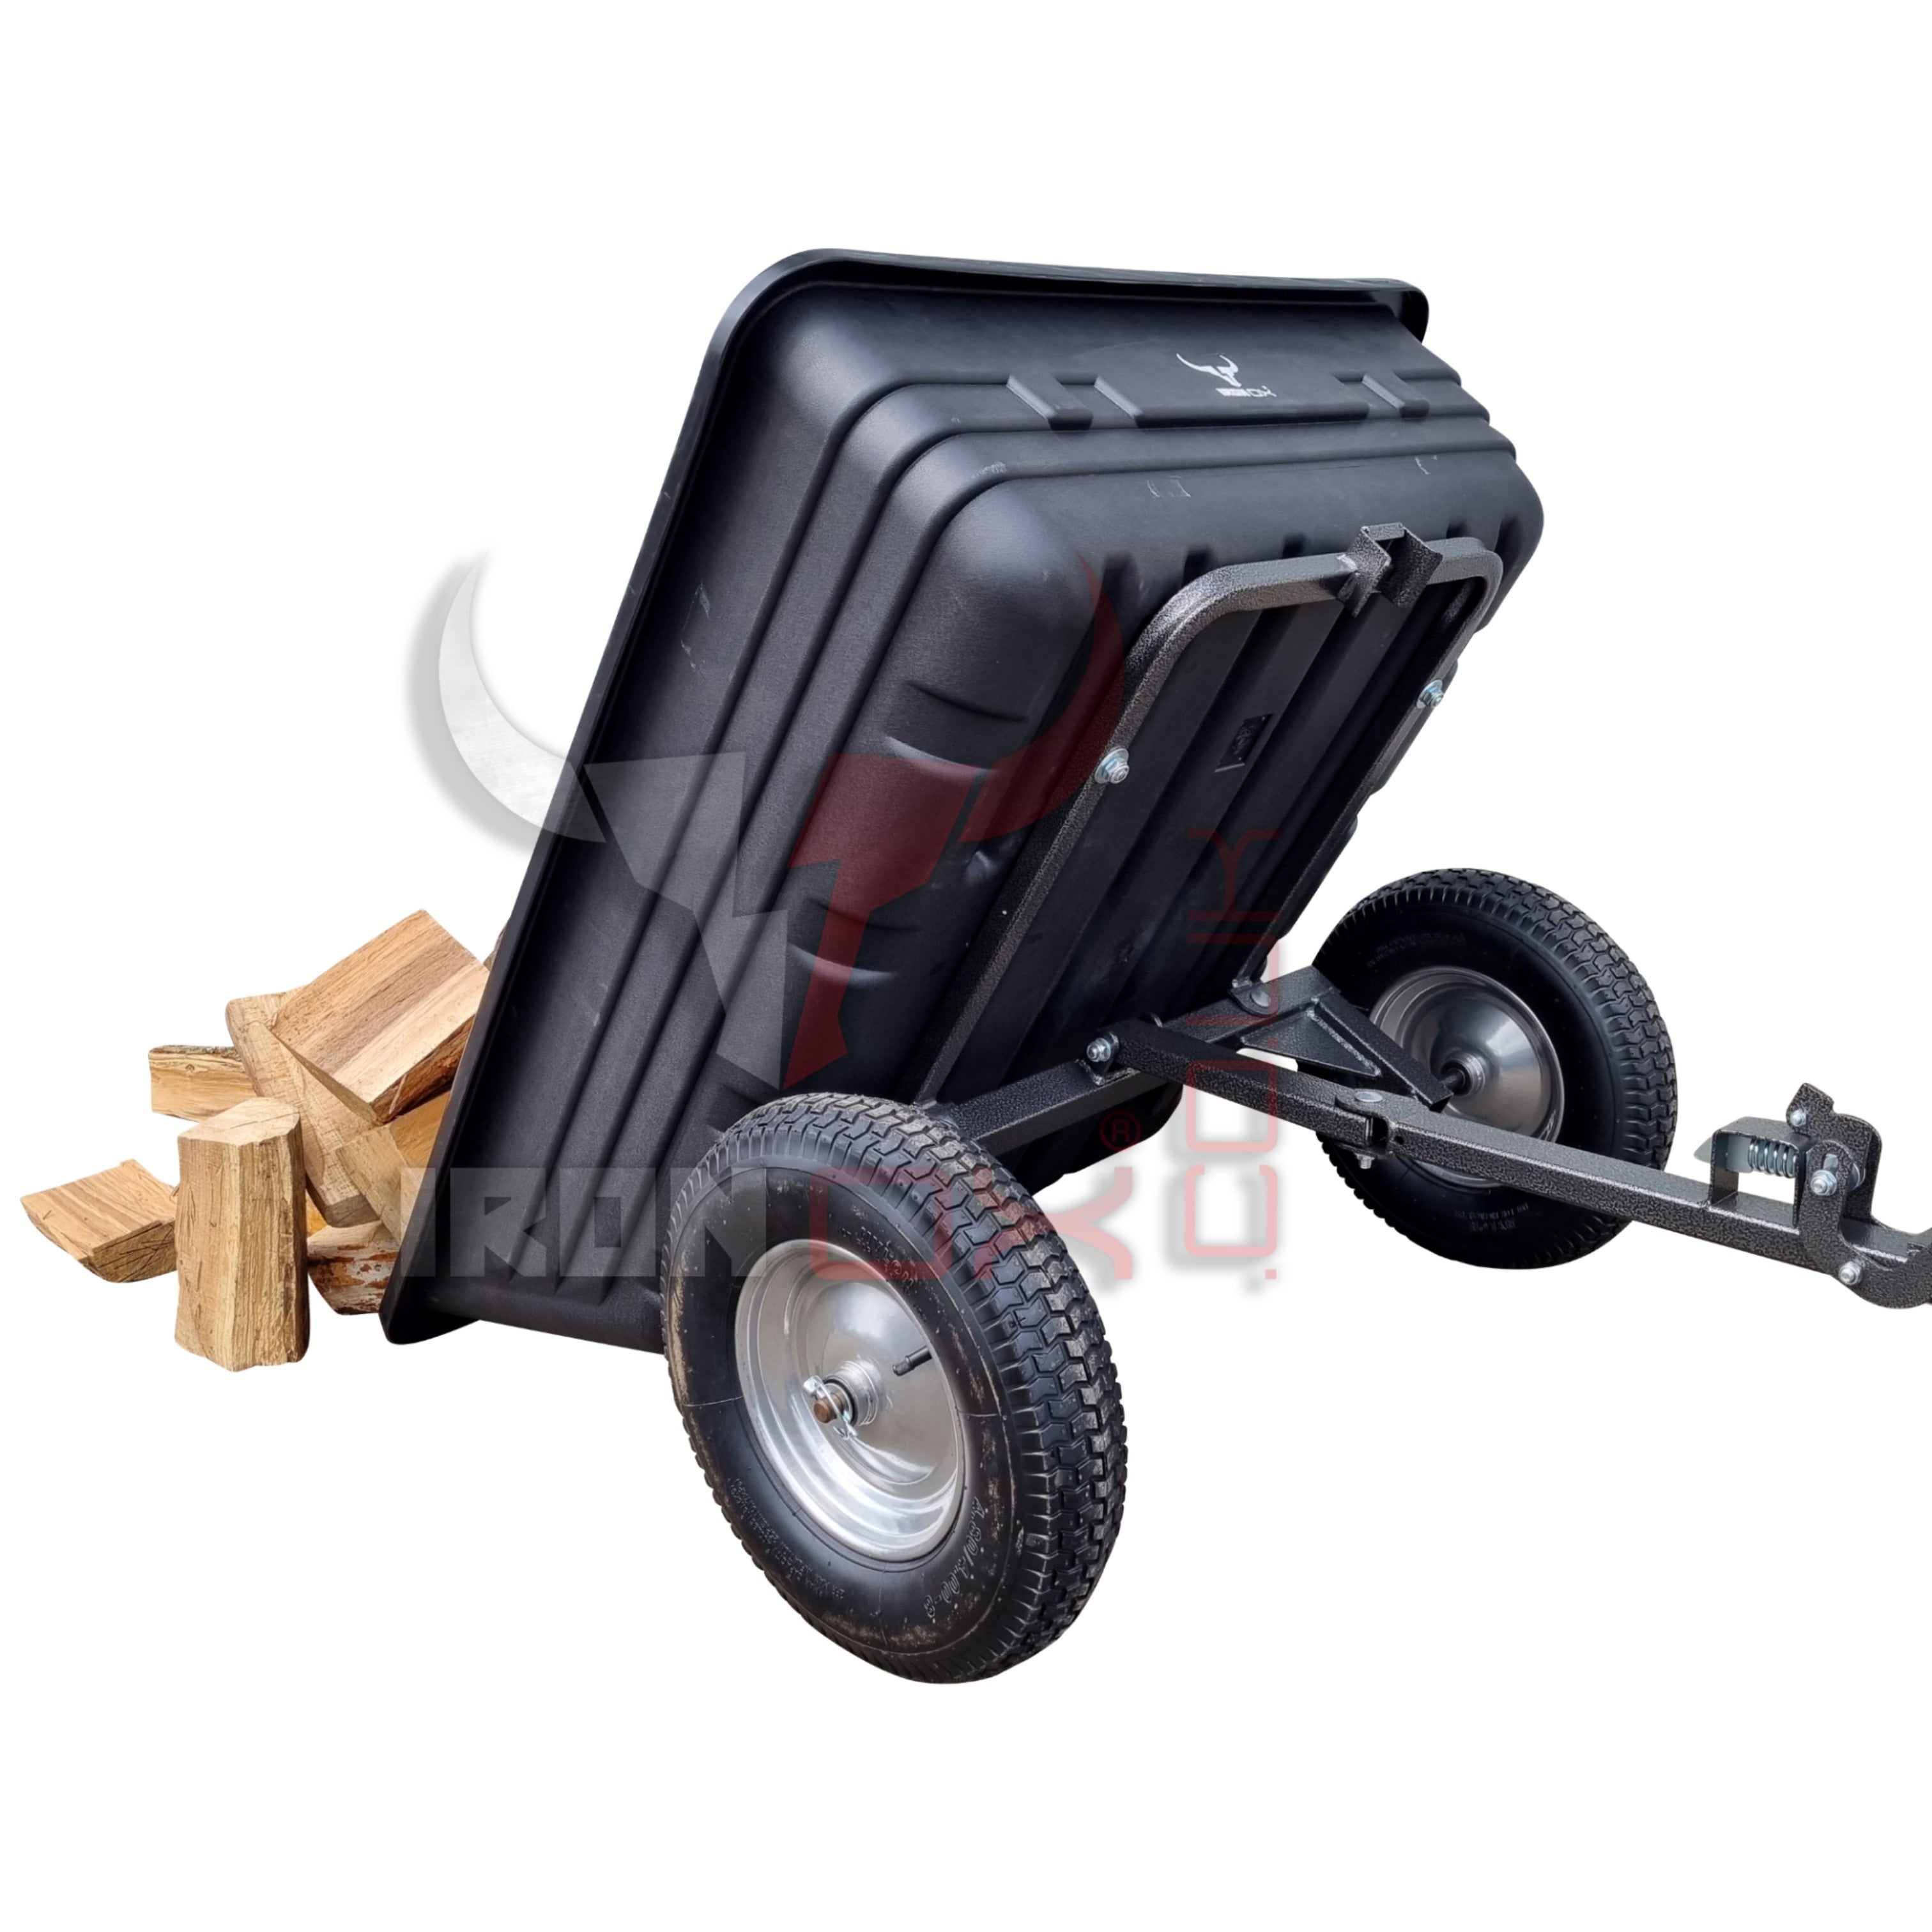 Tipping Trailers for atv or mowers - 0